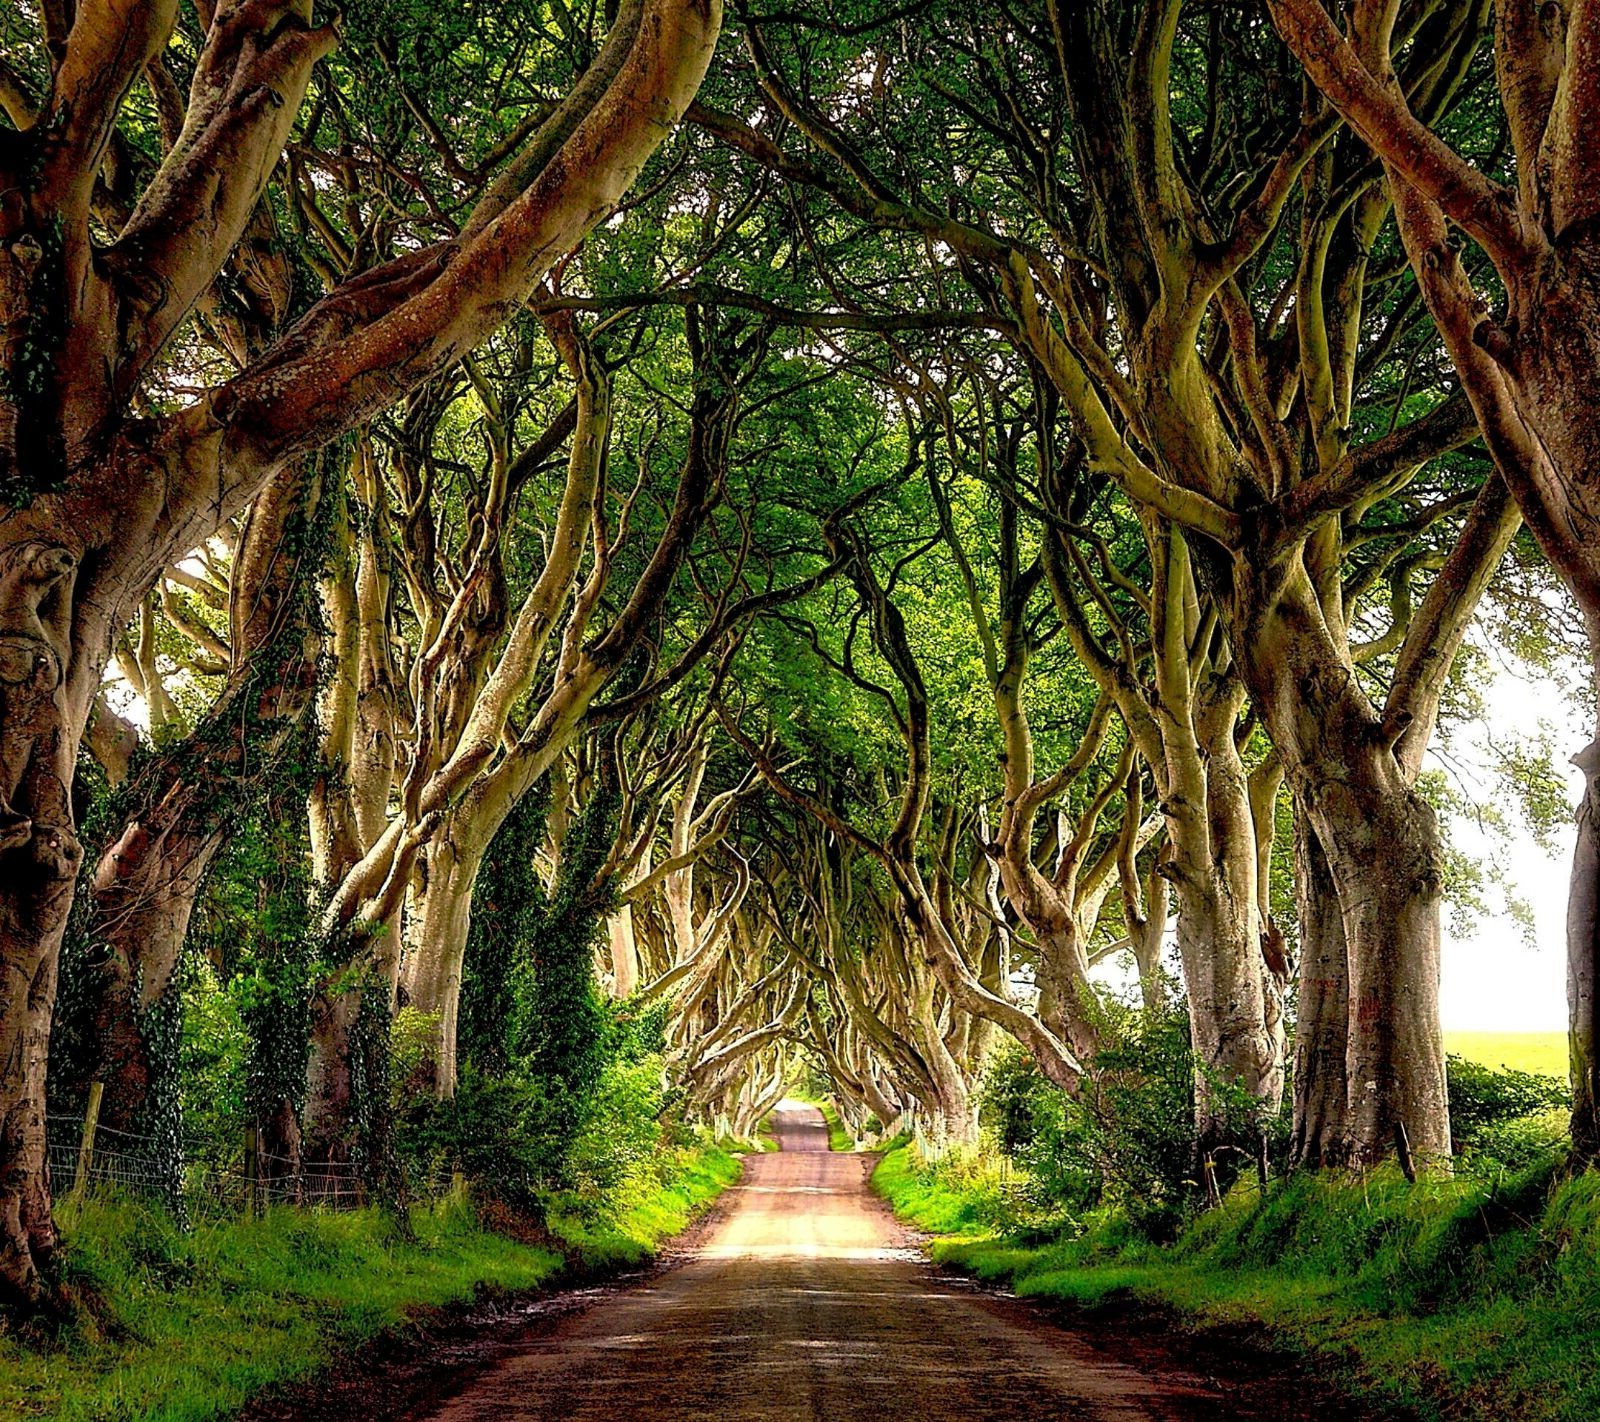 ireland, road, man made, greenery, tree, twisted tree cell phone wallpapers